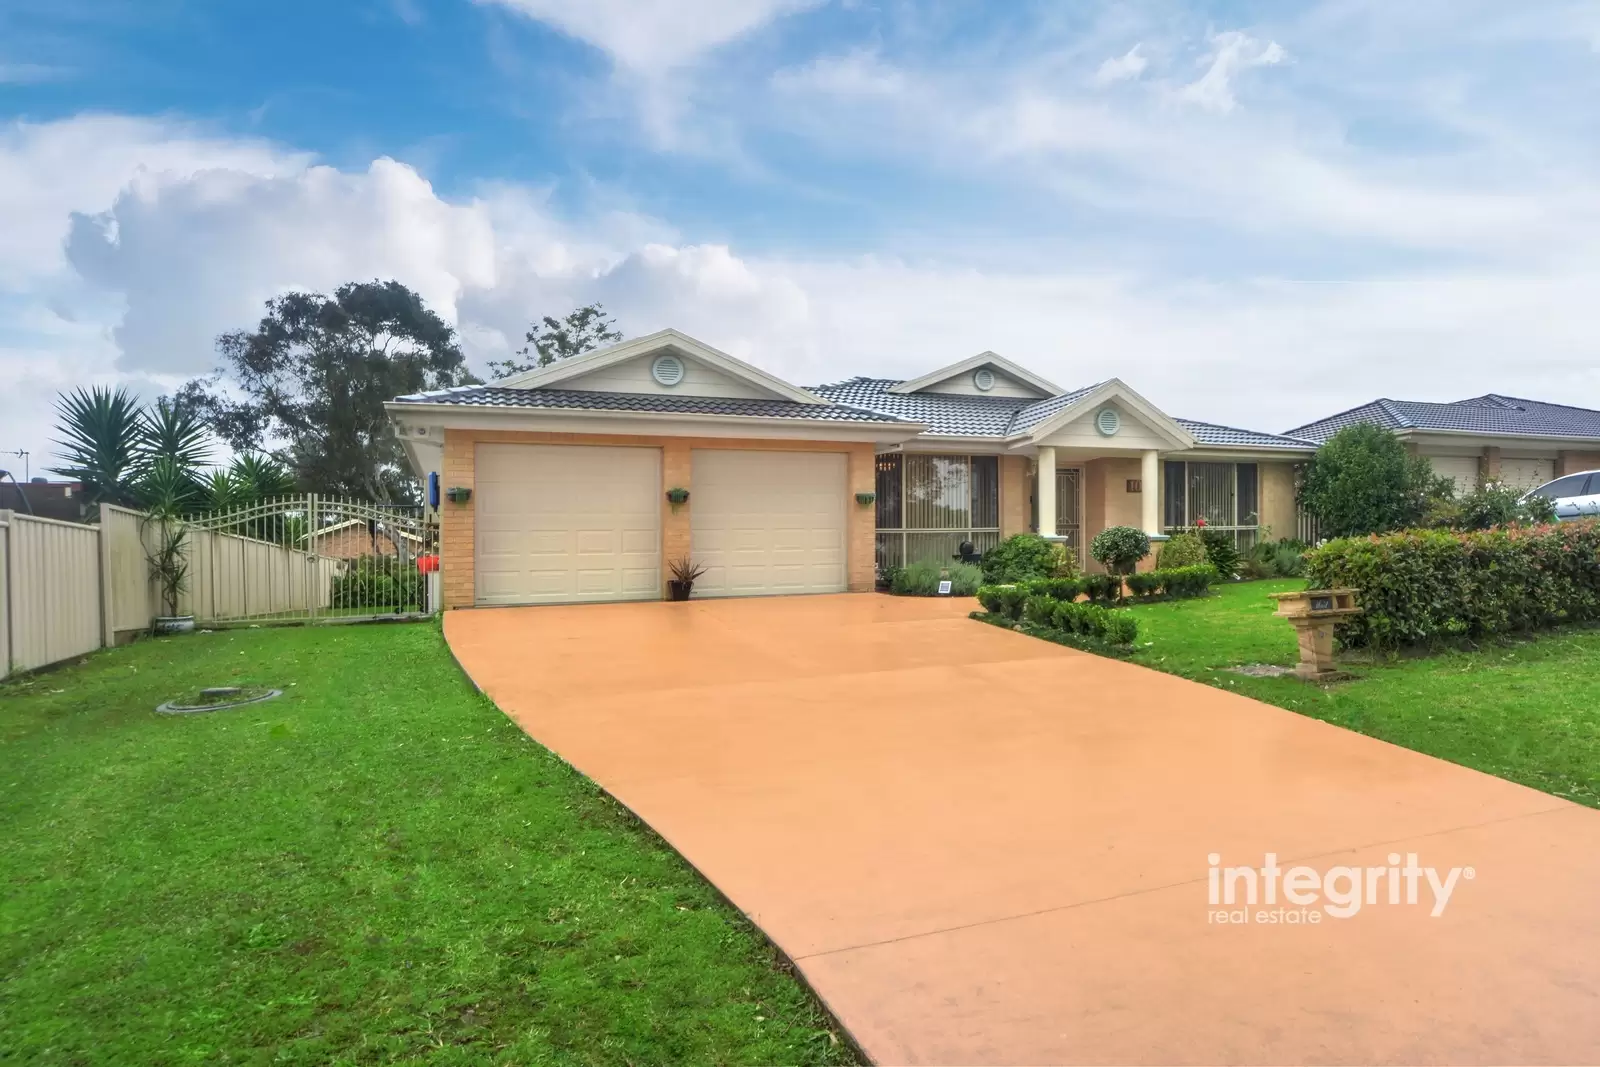 10 Cherry Plum Way, Worrigee Sold by Integrity Real Estate